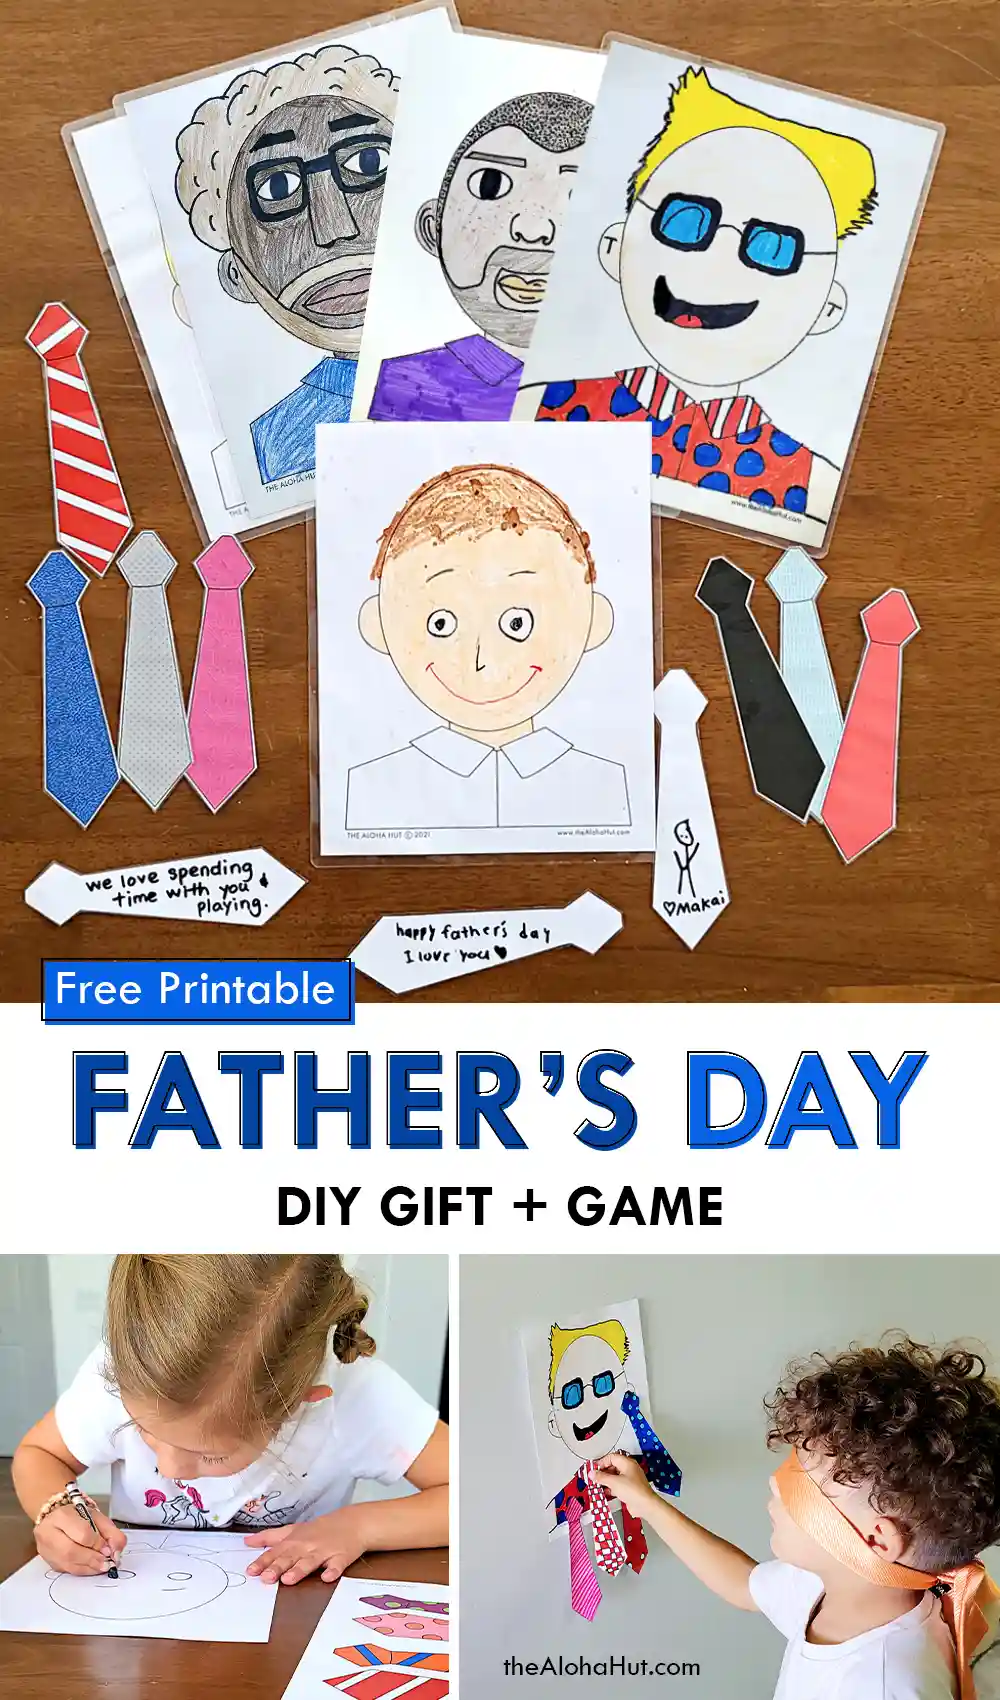 Draw a picture of dad this Father's Day with these printable Father's Day coloring pages. Use the ties to write special messages to dad. This is a fun and easy Father's Day gift idea and the ties make a fun Father's Day card for dad.